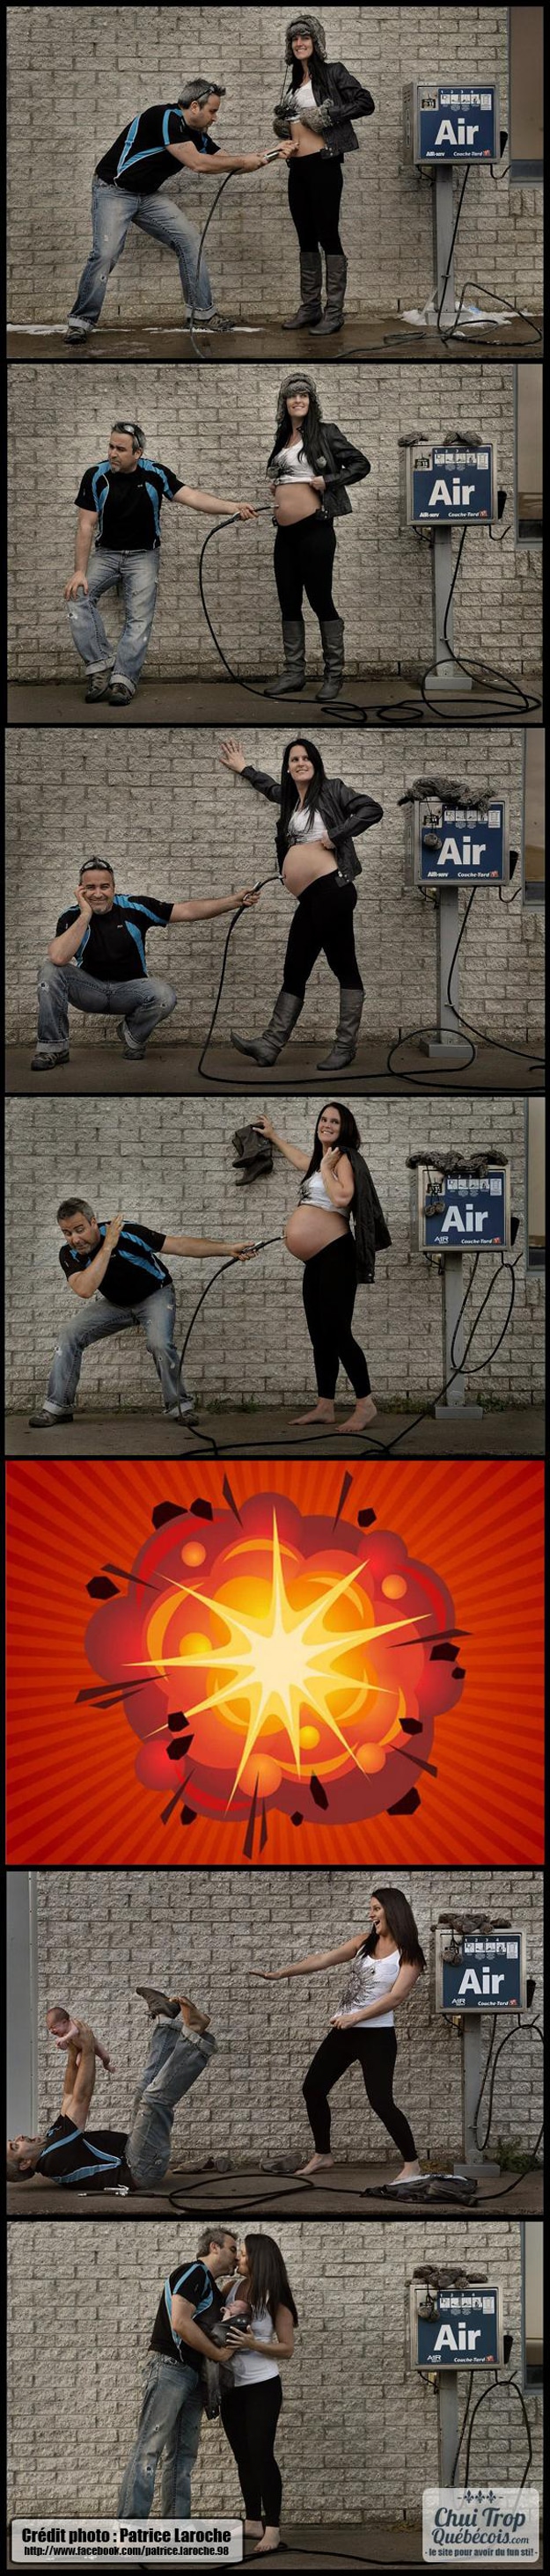 How To Make A Baby With An Air Pump [7 Pictures]